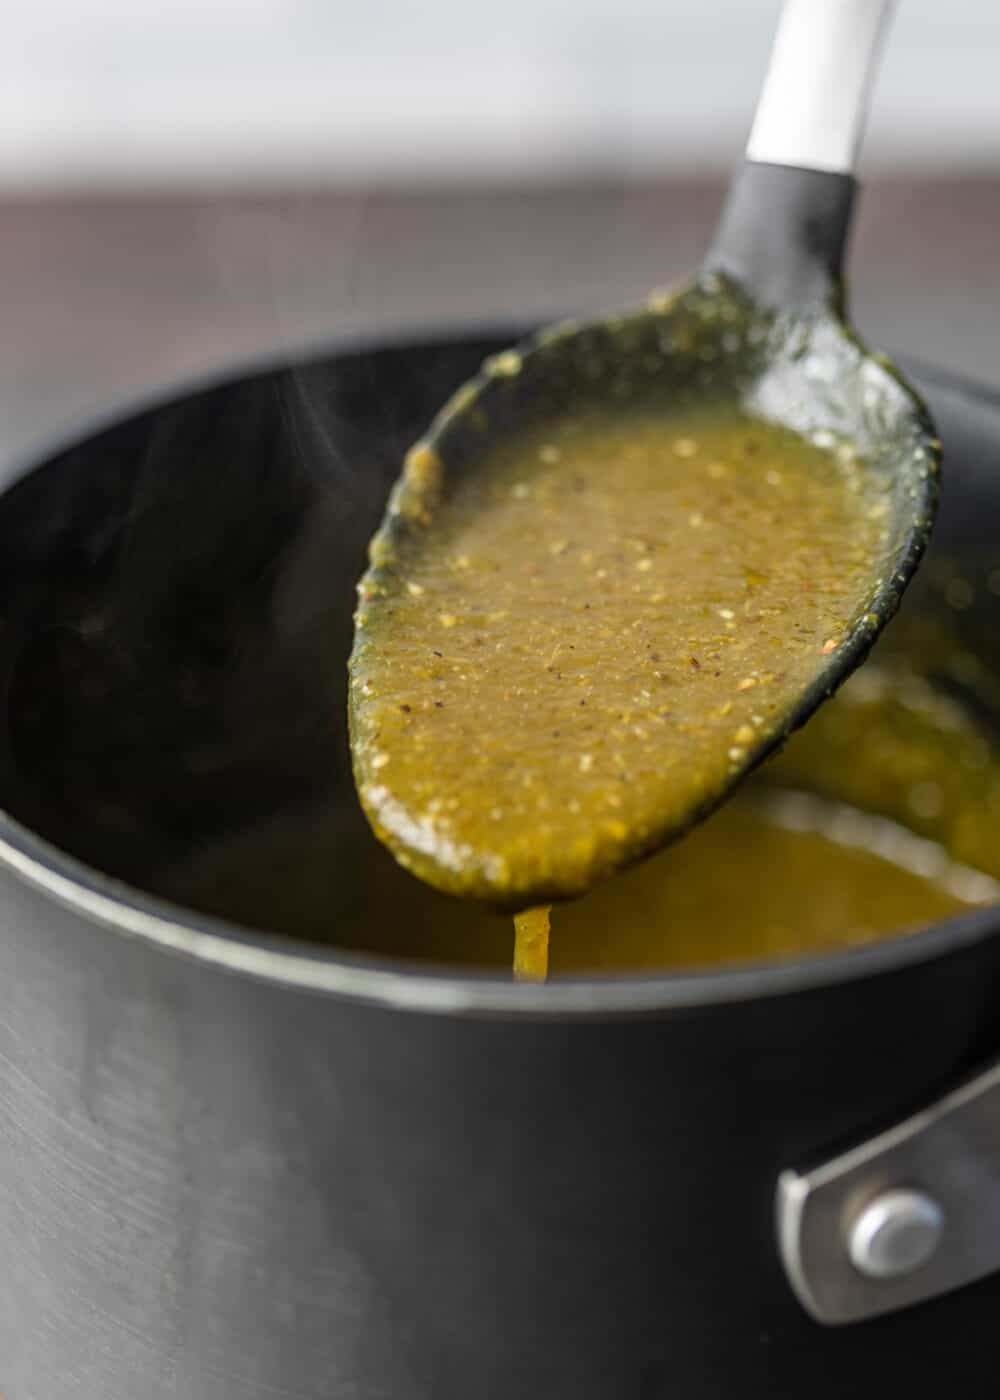 extreme closeup: a spoonful of this Serrano hot sauce recipe over a saucepan with more sauce